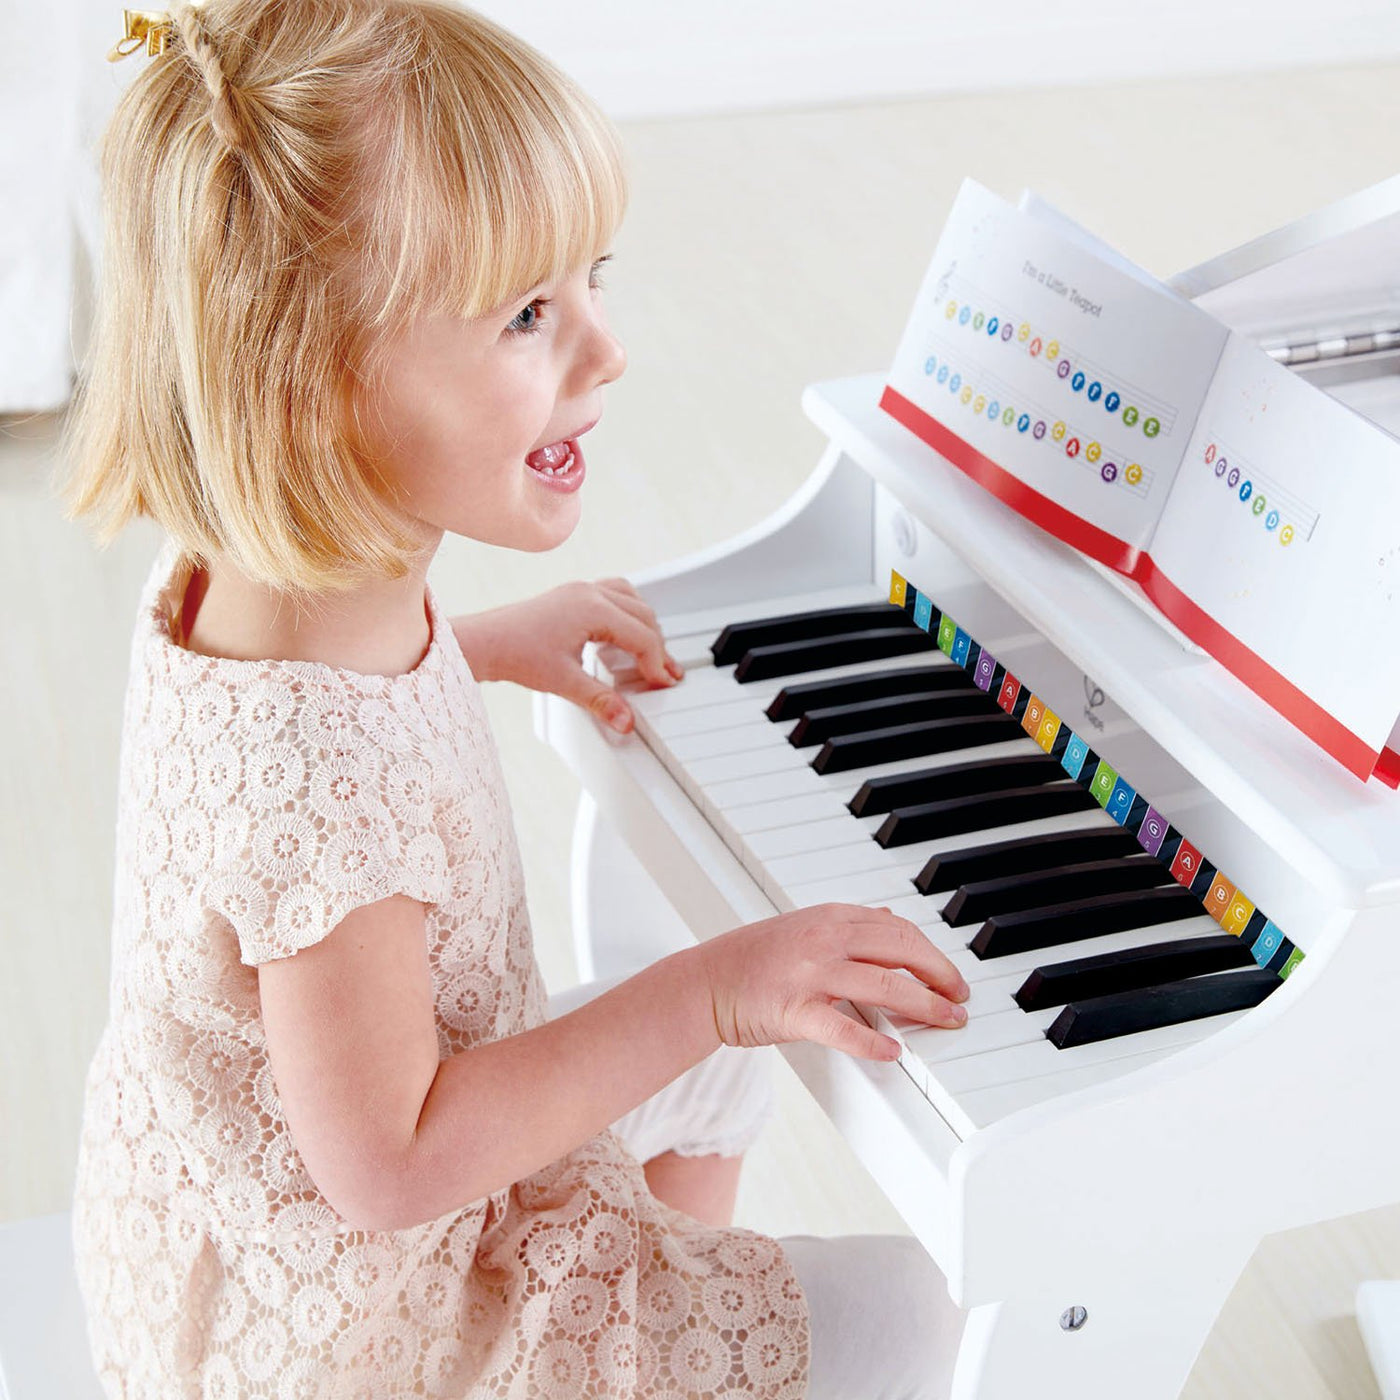 Mini Piano For Kid 25 Keys Keyboard Mechanical Piano For Entry level  Beginer Grade Musical Instrument Children Toy